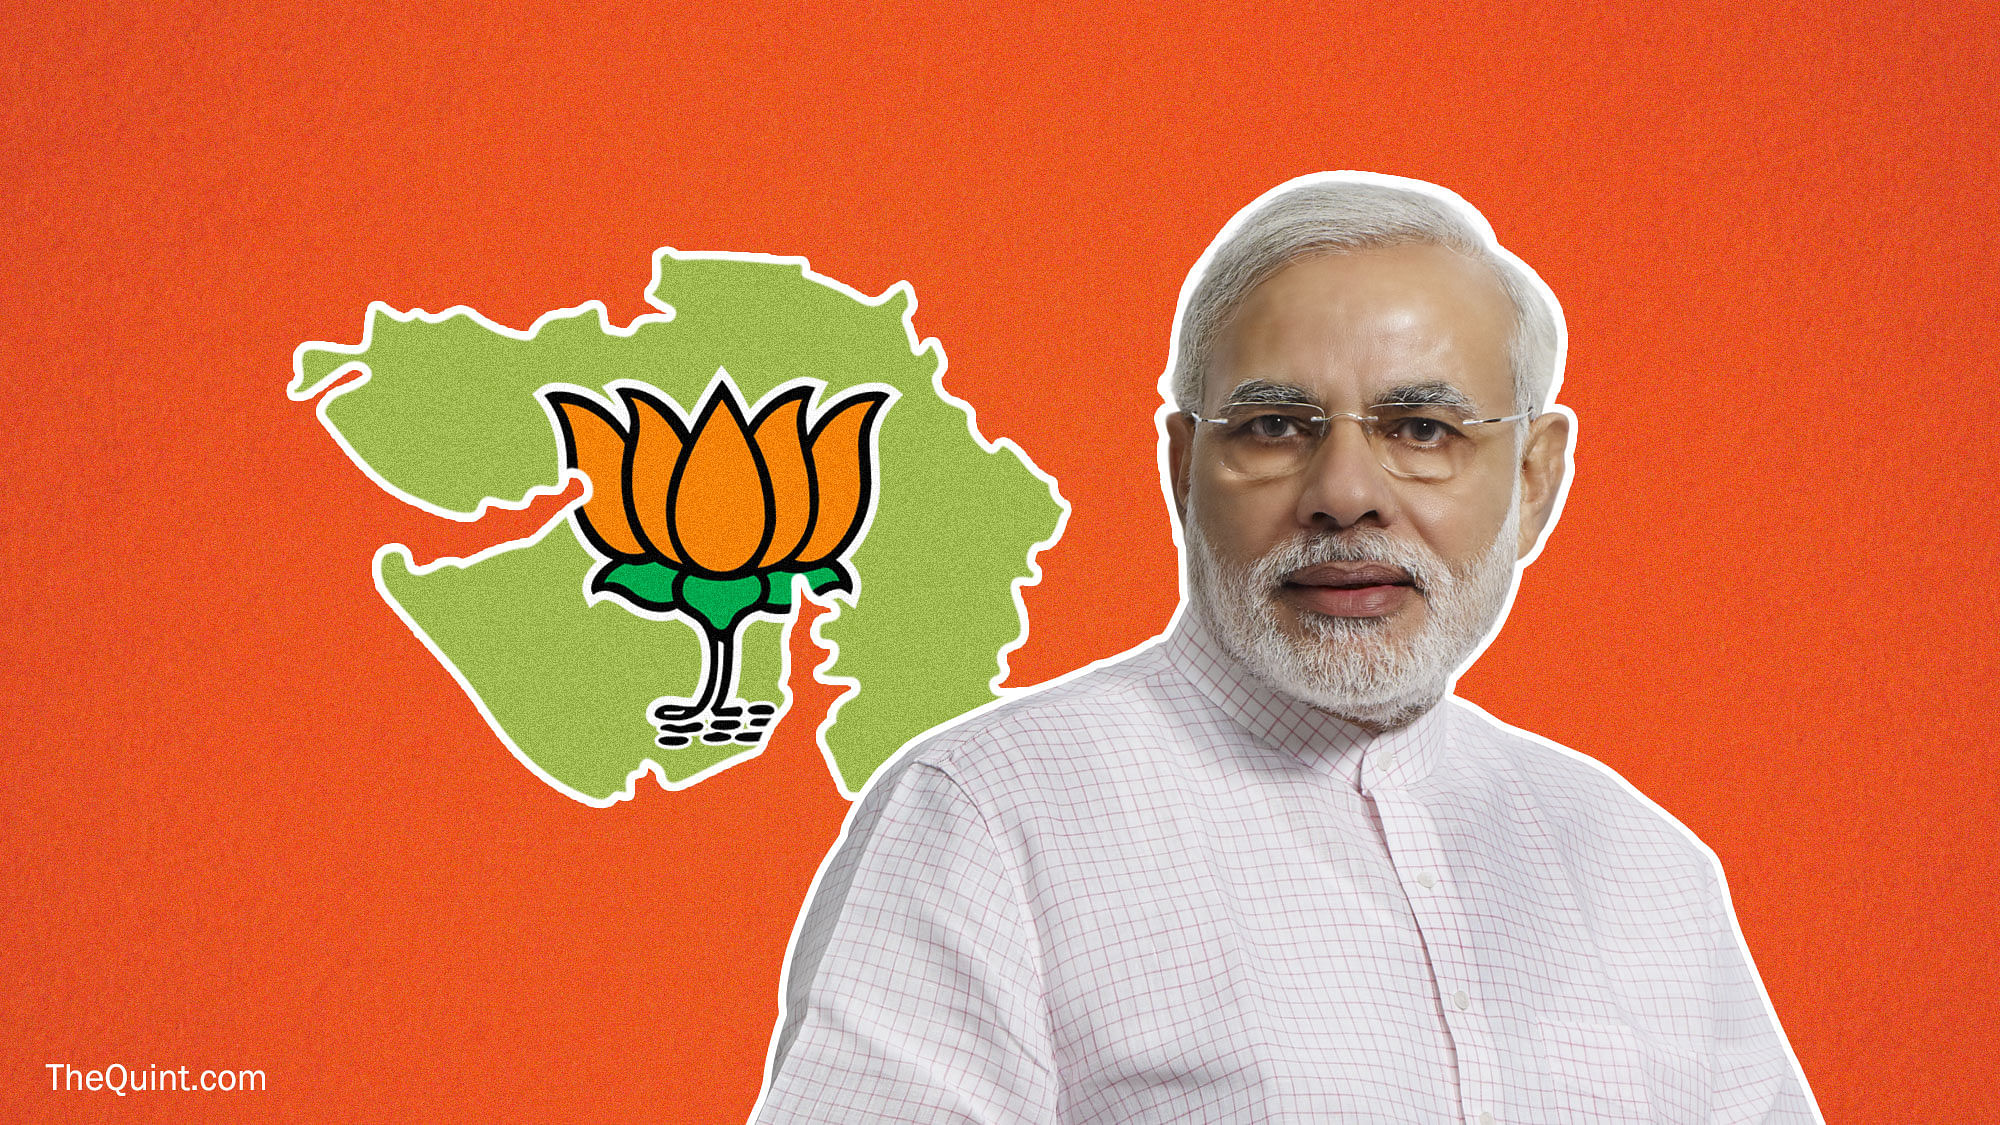 The BJP alone received Rs 290.22 crore or 89.22 percent of the total donations received by all political parties from electoral trusts during 2016-17.&nbsp;